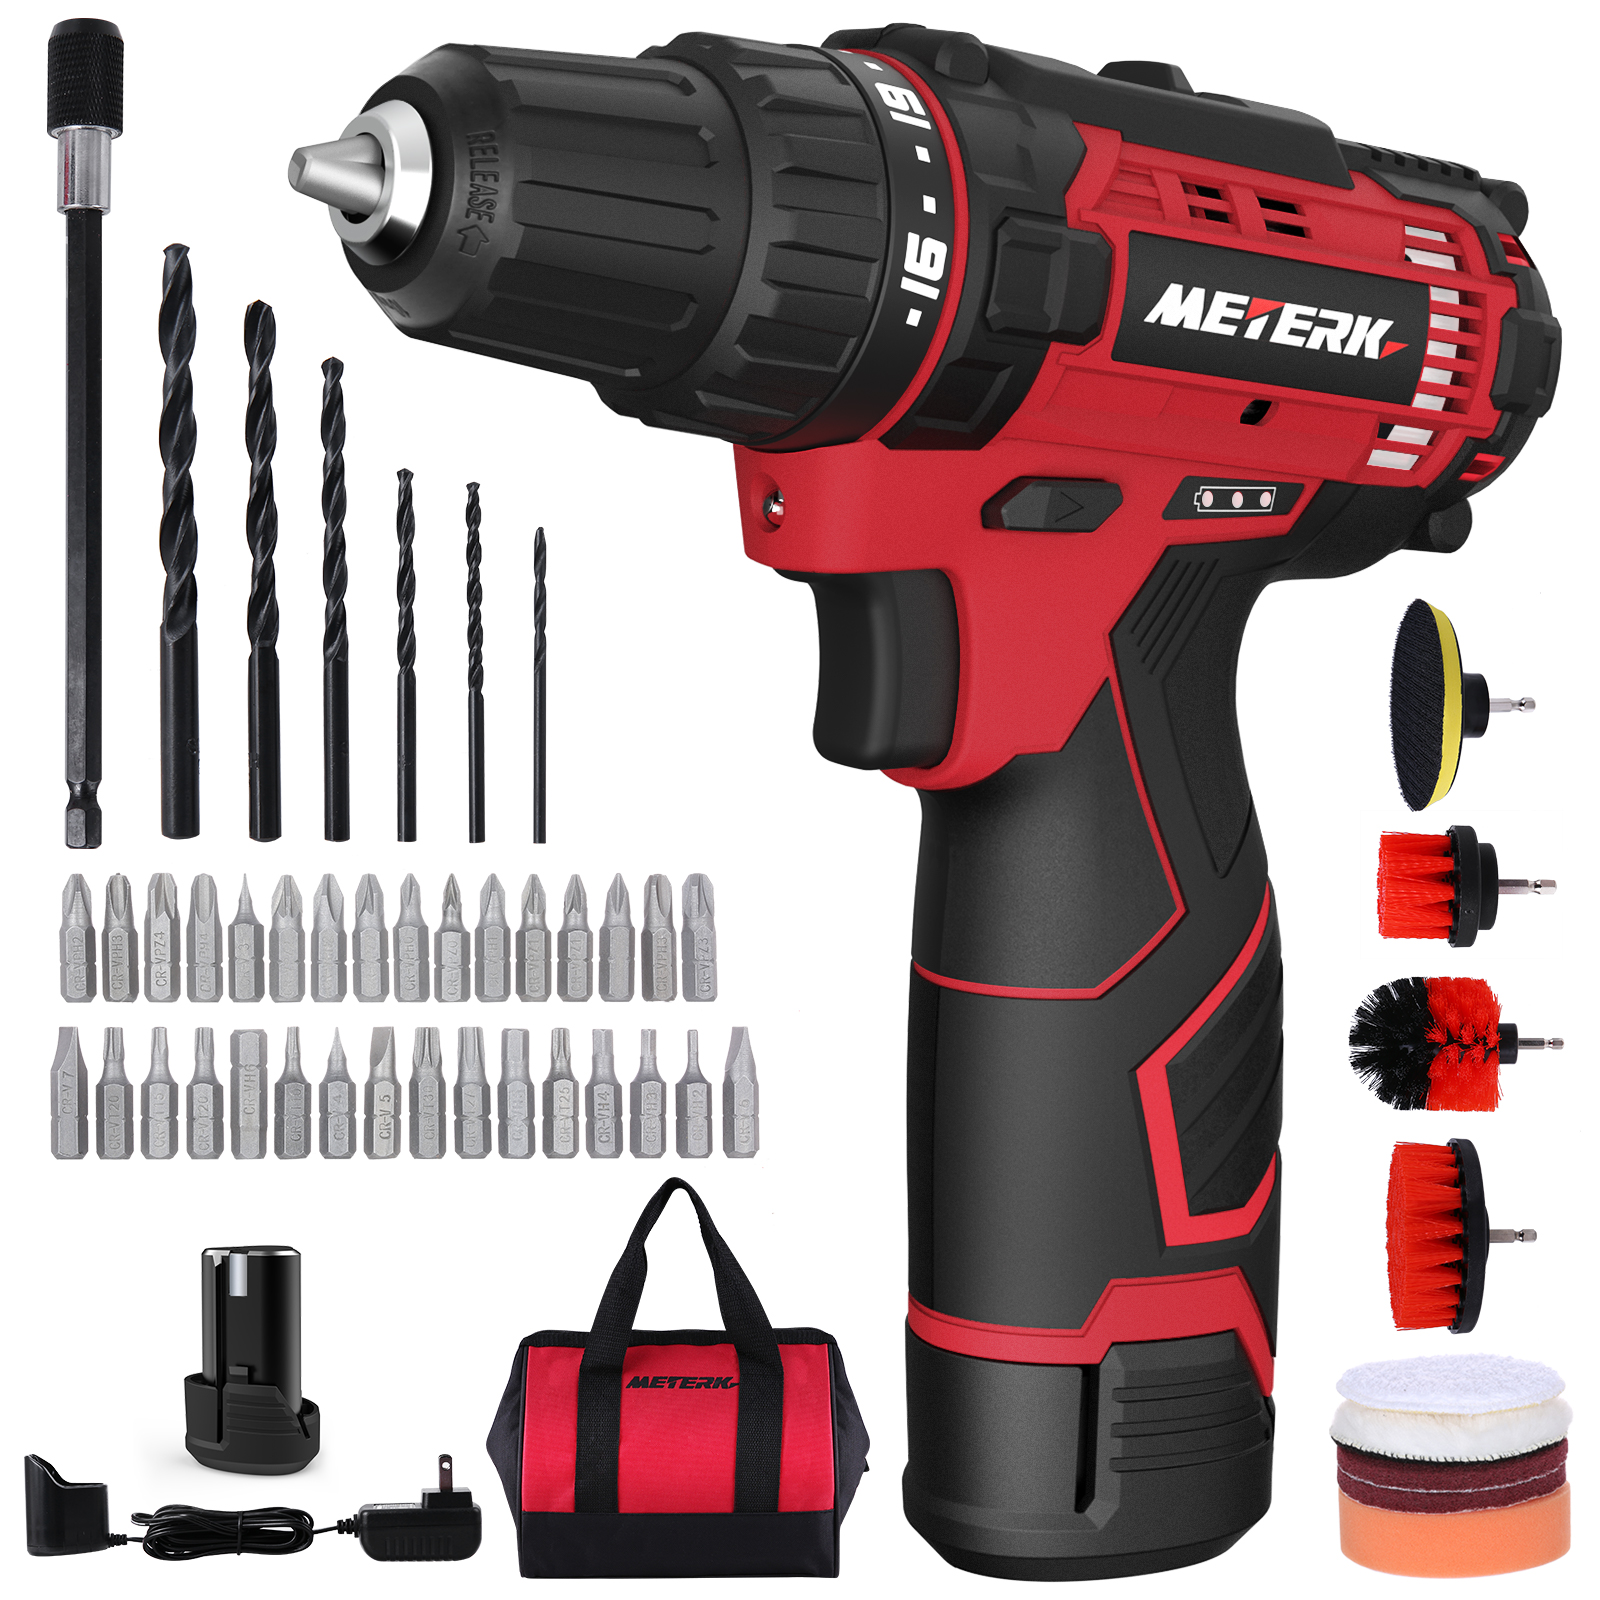 Meterk®Cordless Drill  12V Power Driver Kit 50PCS Electric Drill Brushes Set 18+1 Clutch Screw Driver with LED